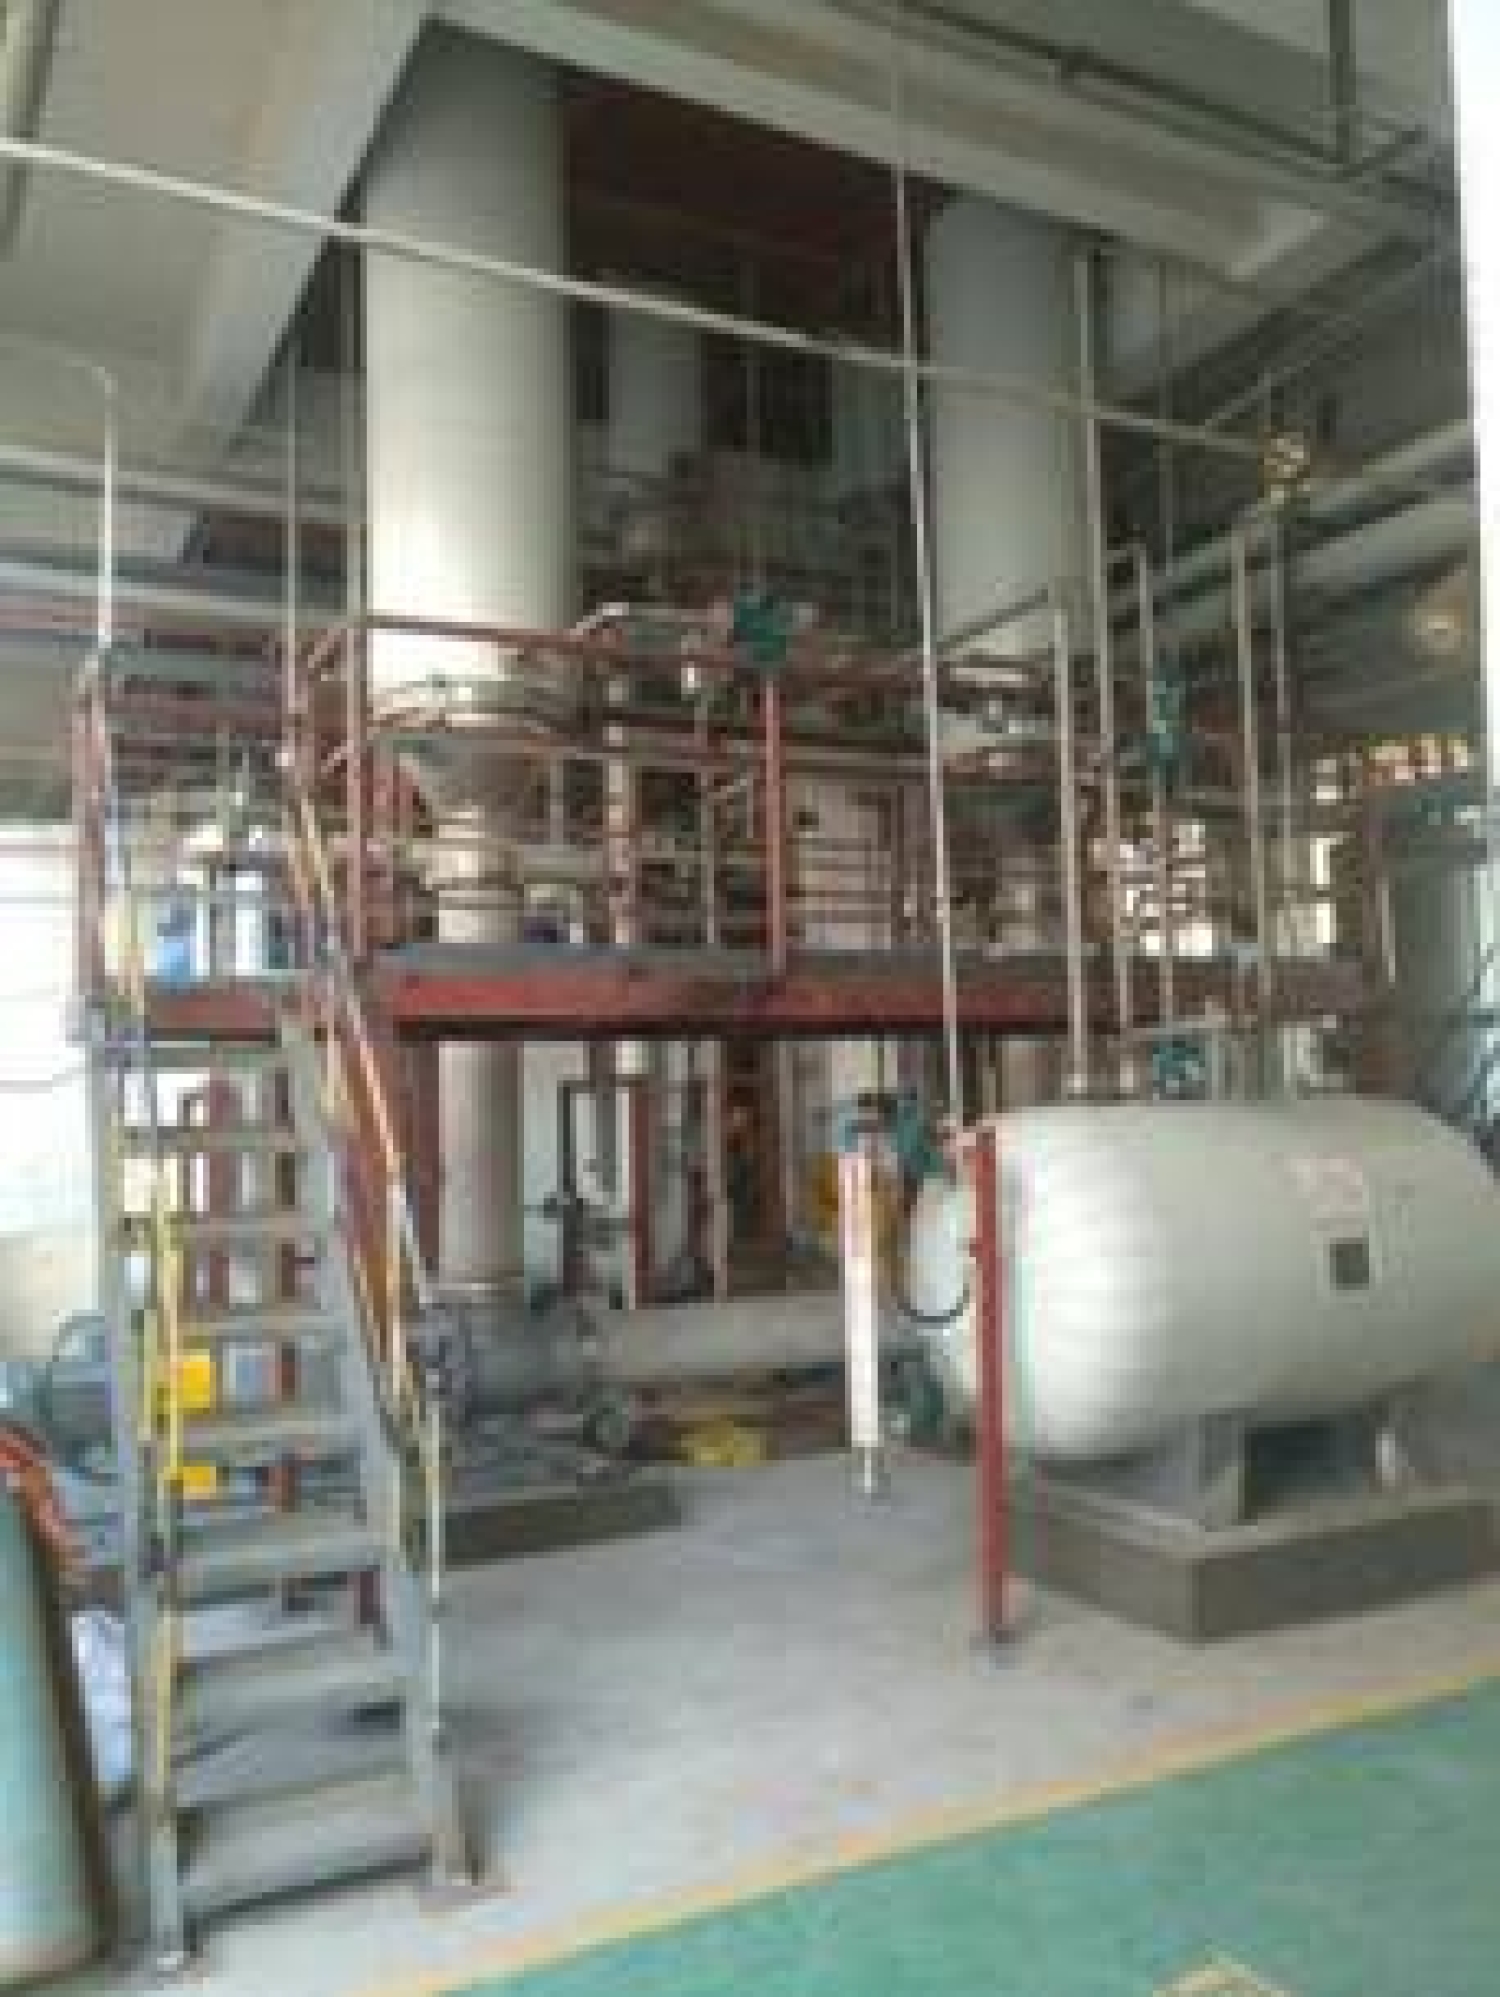 Water Treatment of Enviromental Protection